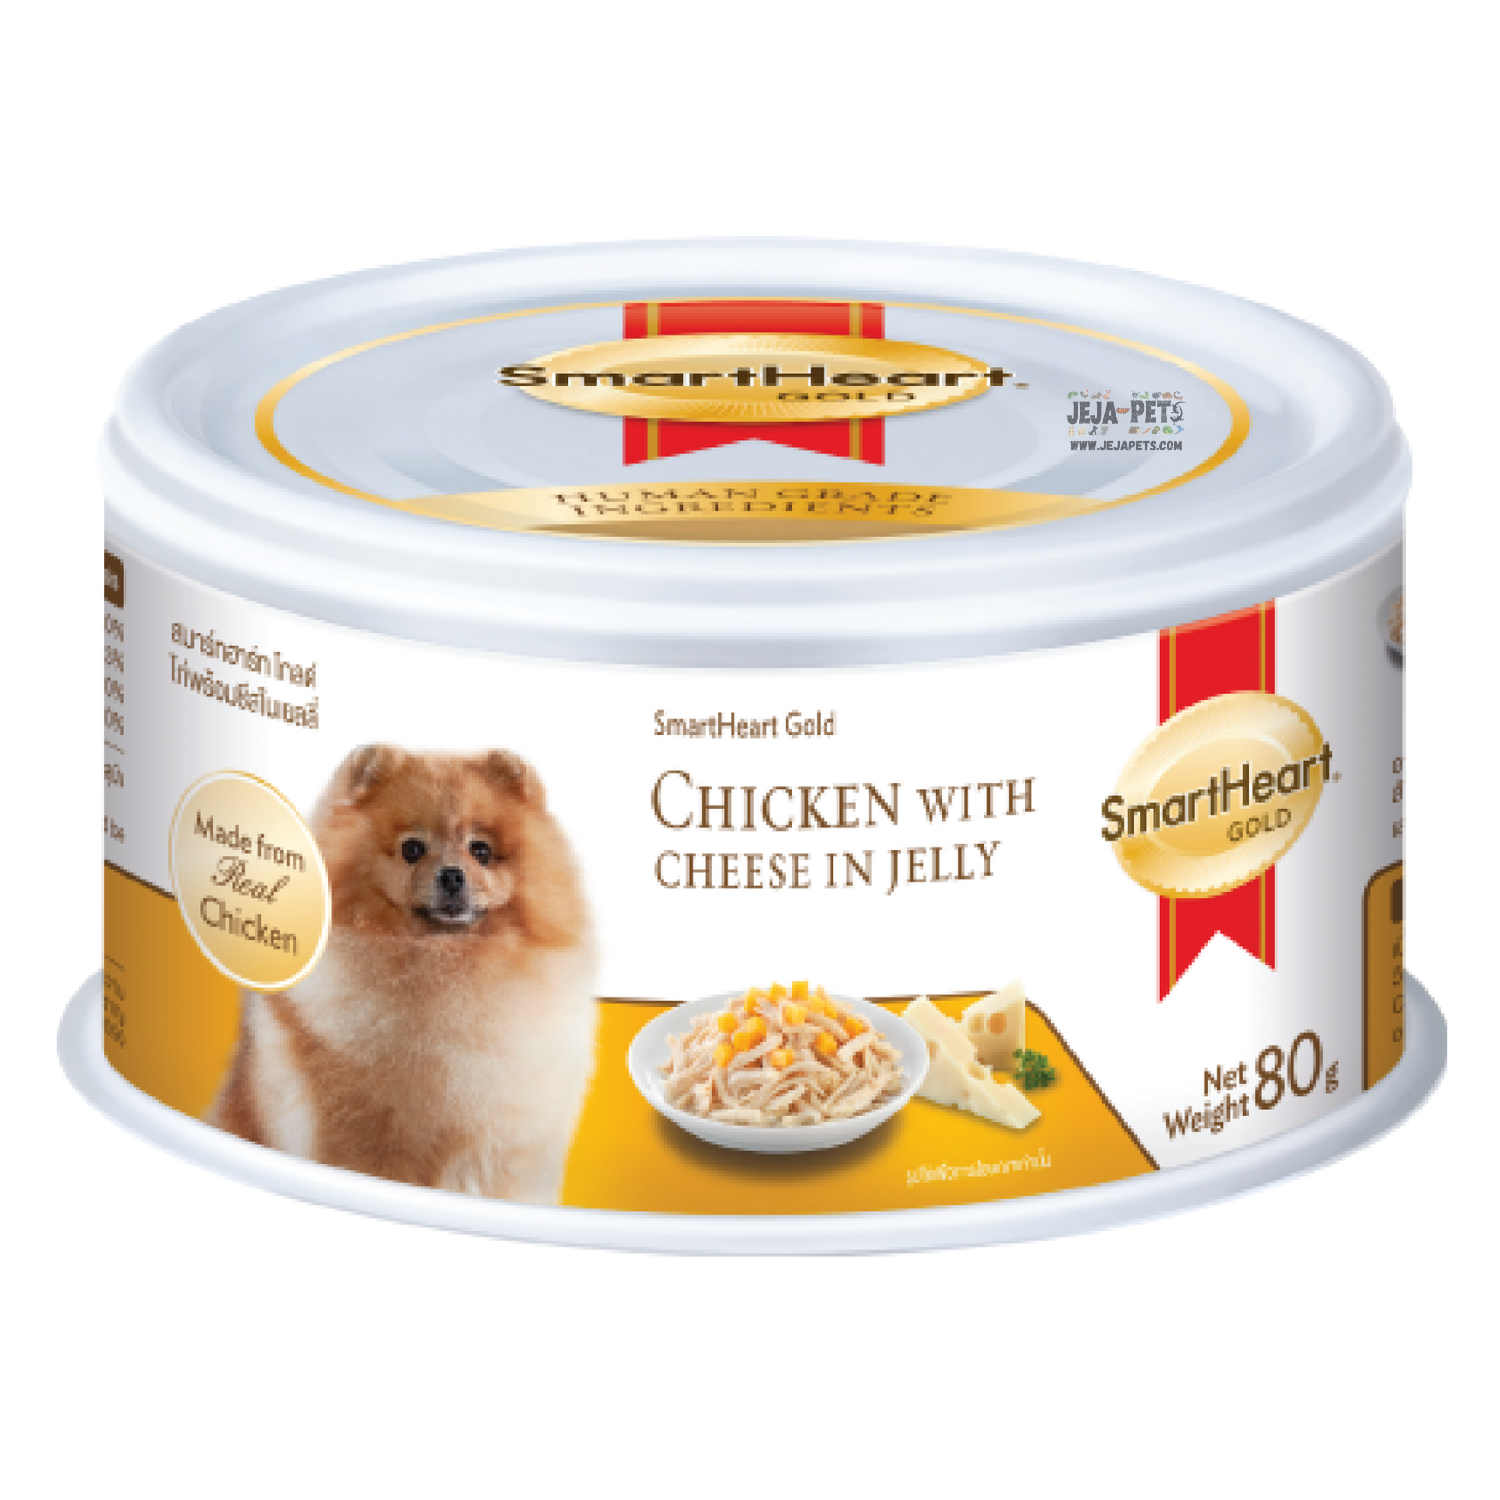 SmartHeart Gold Wet Dog Food Canned Chicken with Cheese in Jelly - 80g